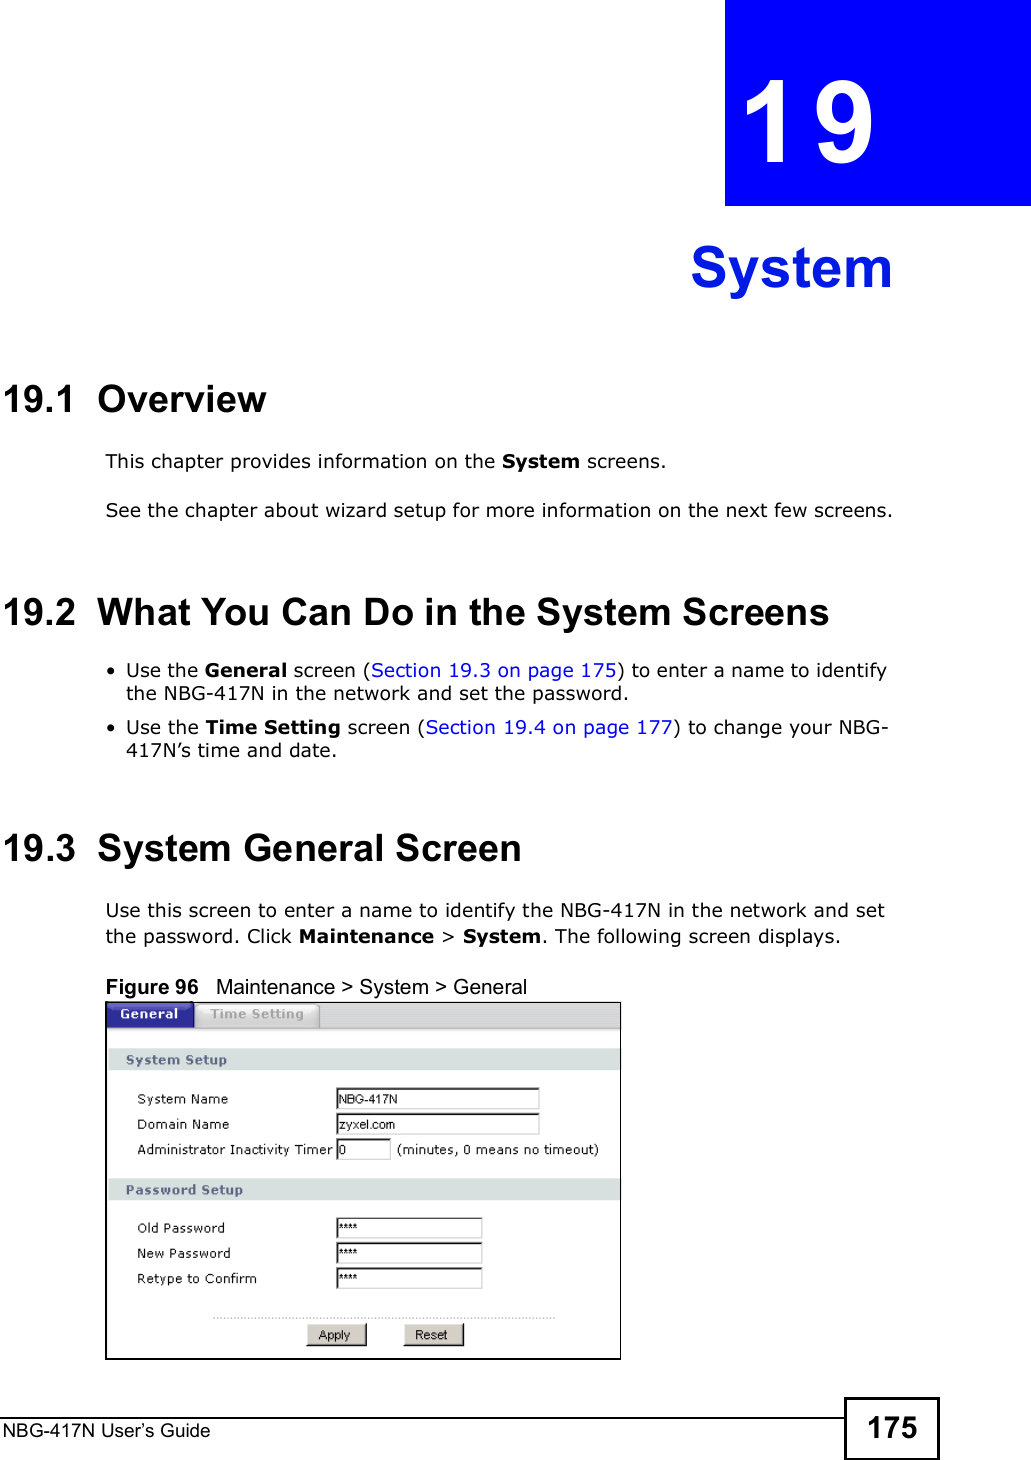 NBG-417N User s Guide 175CHAPTER  19 System19.1  OverviewThis chapter provides information on the System screens. See the chapter about wizard setup for more information on the next few screens.19.2  What You Can Do in the System Screens Use the General screen (Section 19.3 on page 175) to enter a name to identify the NBG-417N in the network and set the password. Use the Time Setting screen (Section 19.4 on page 177) to change your NBG-417N!s time and date.19.3  System General Screen Use this screen to enter a name to identify the NBG-417N in the network and set the password. Click Maintenance &gt; System. The following screen displays.Figure 96   Maintenance &gt; System &gt; General 